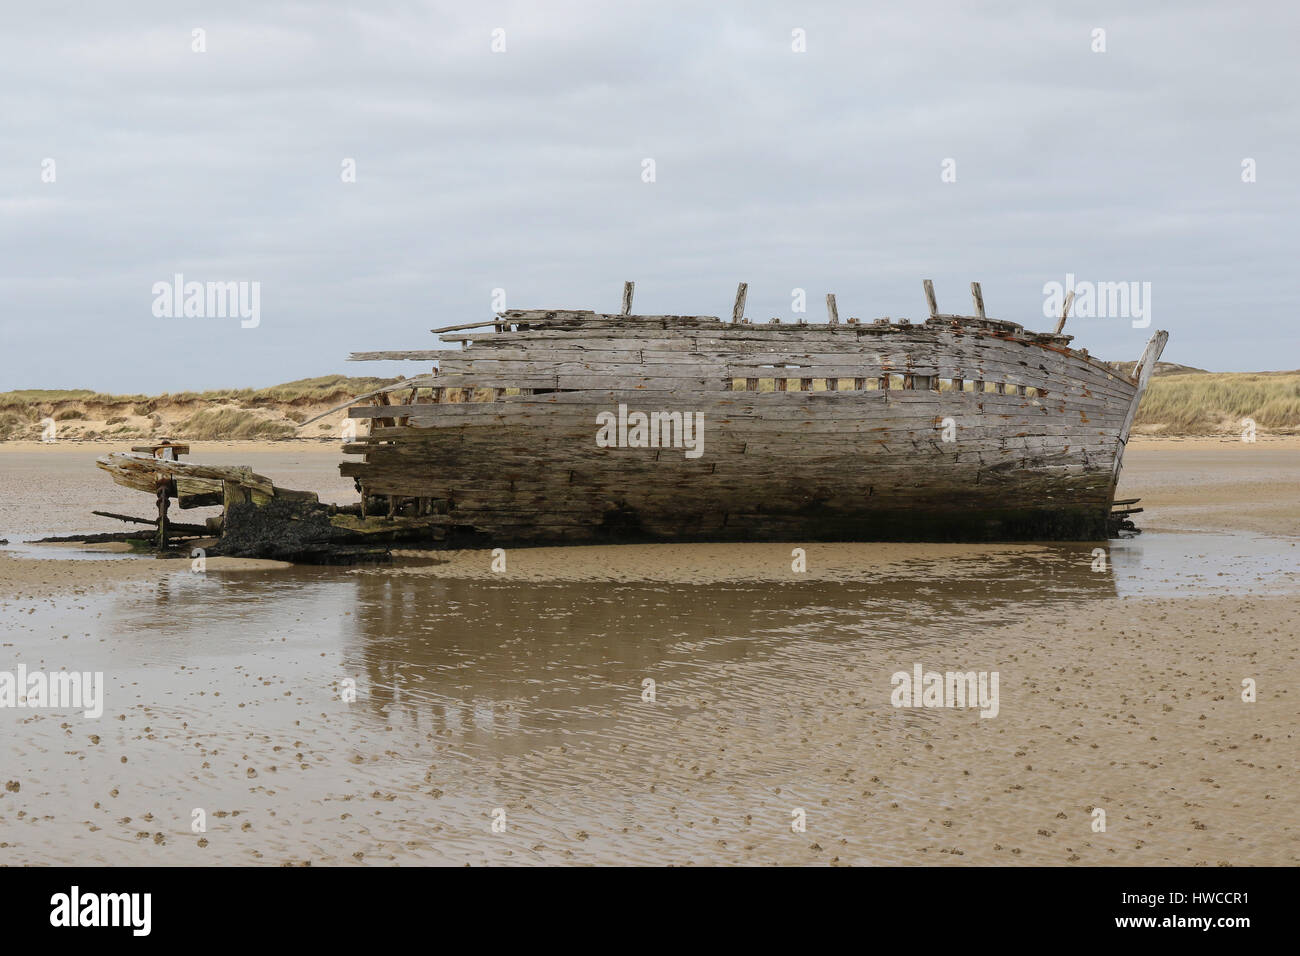 The wreck of a wooden fishing boat at Bunbeg, County Donegal, Ireland. The wreck is known as Bad Eddie's (fishing boat). Stock Photo